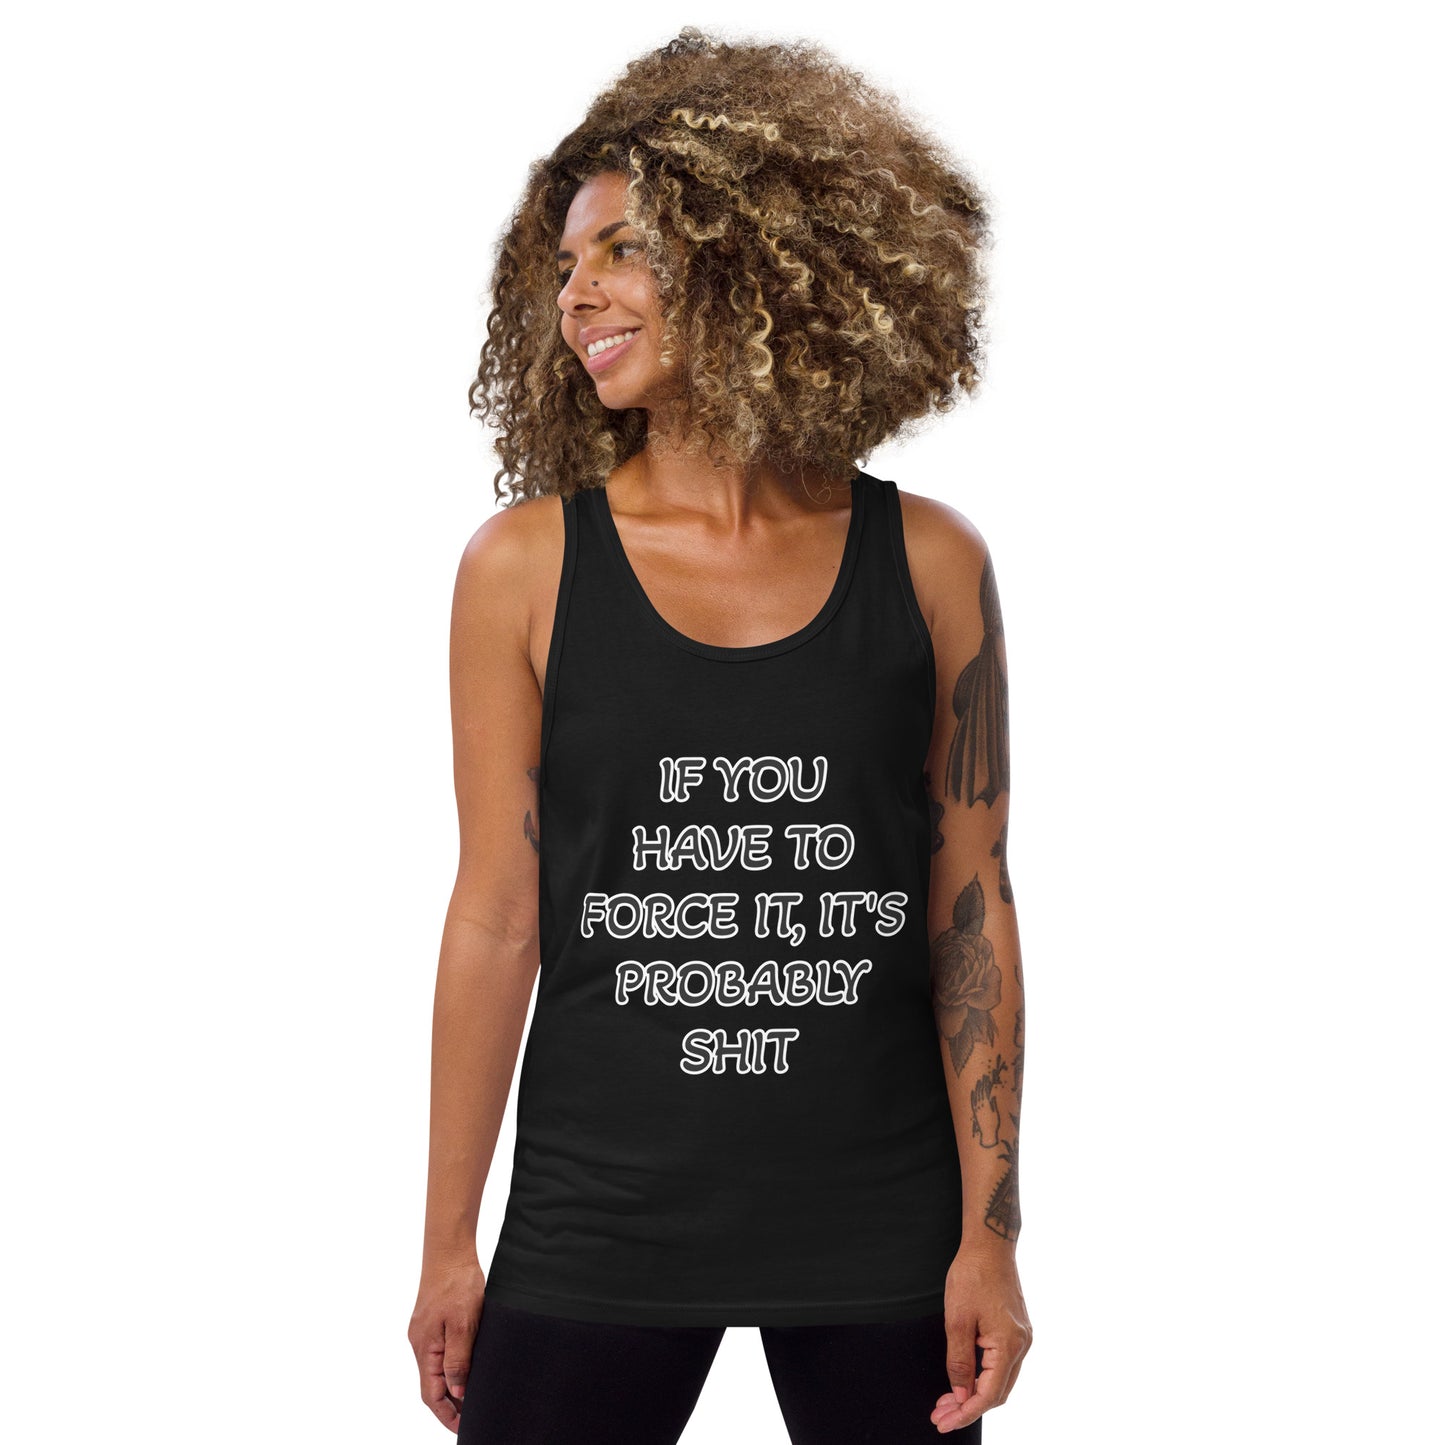 IF YOU HAVE TO FORCE IT, IT'S PROBABLY SHIT- Unisex Tank Top